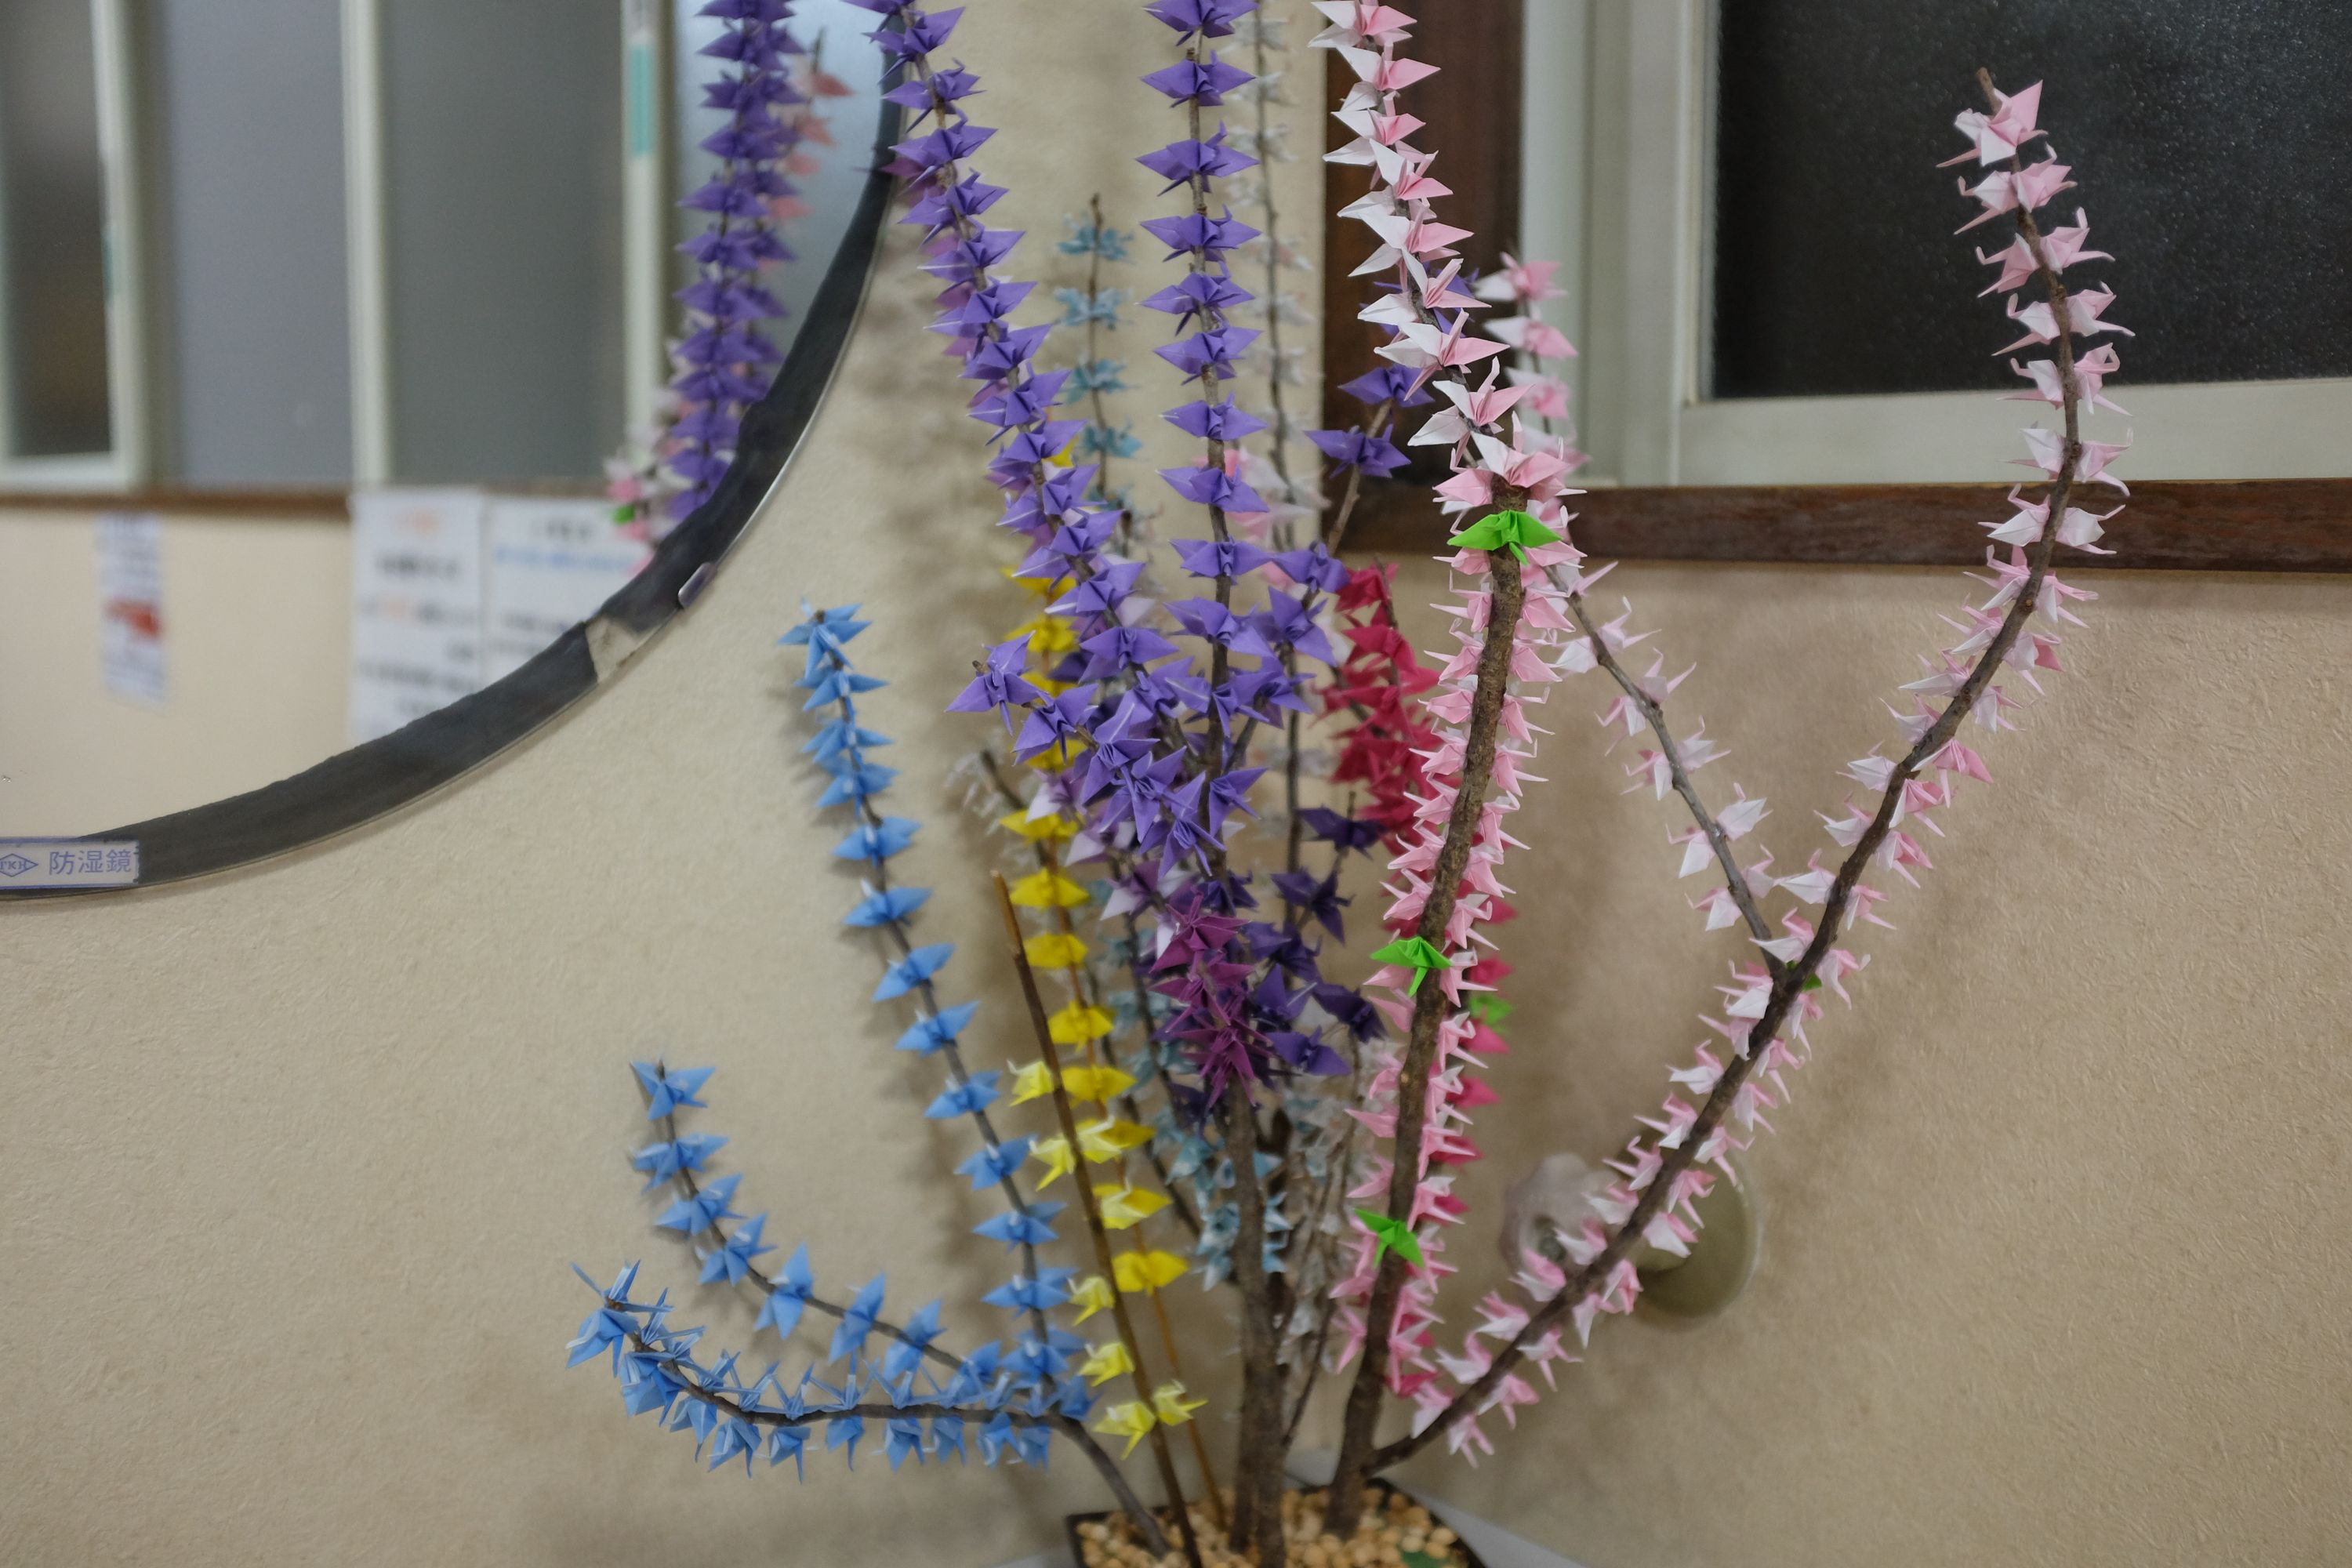 A flower arrangements in a bathroom has paper cranes in every color instead of flowers on the branches.